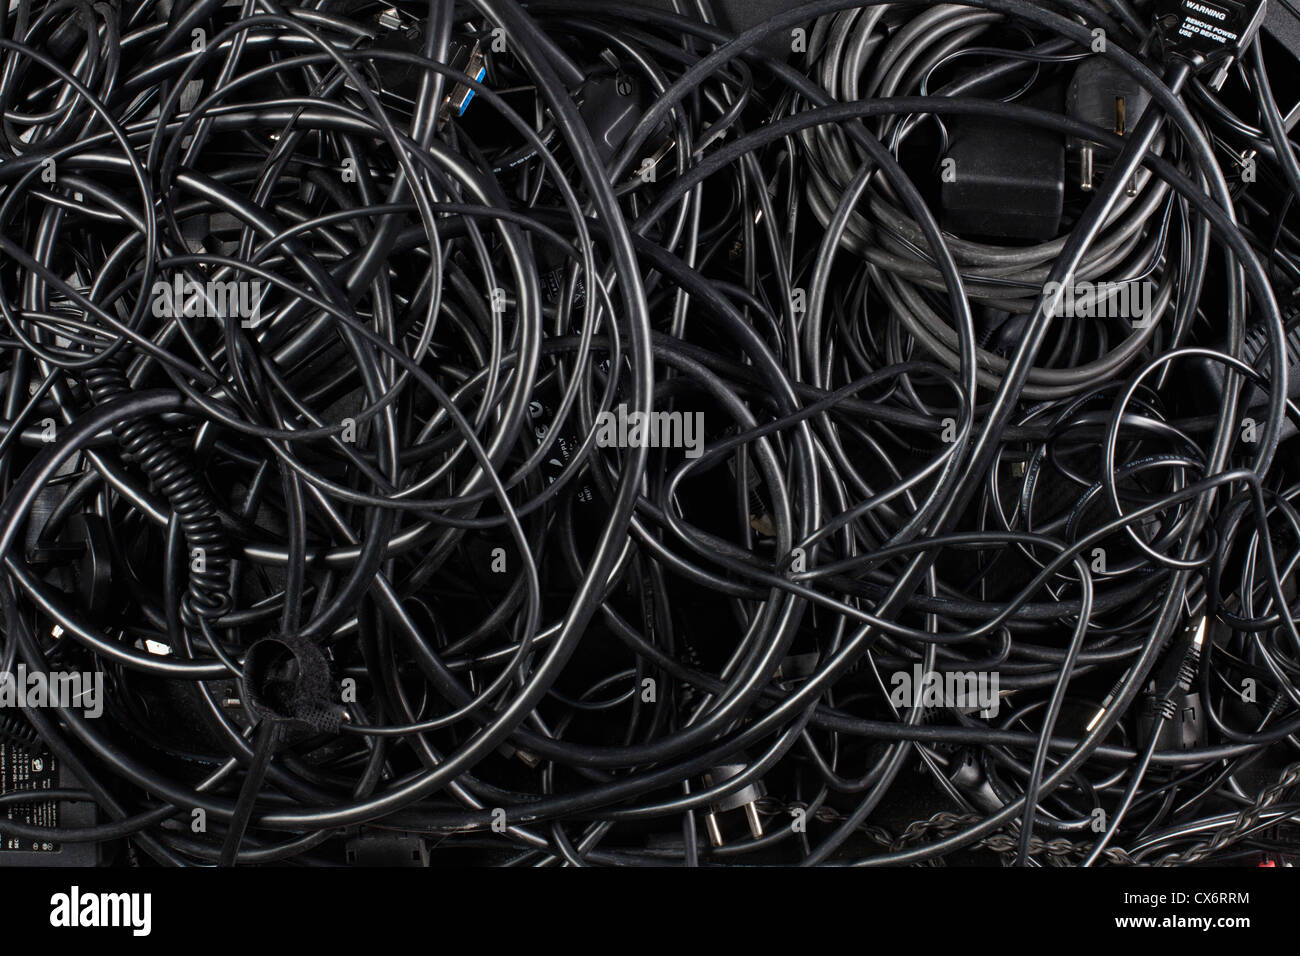 A mess of tangled black cords and cables Stock Photo